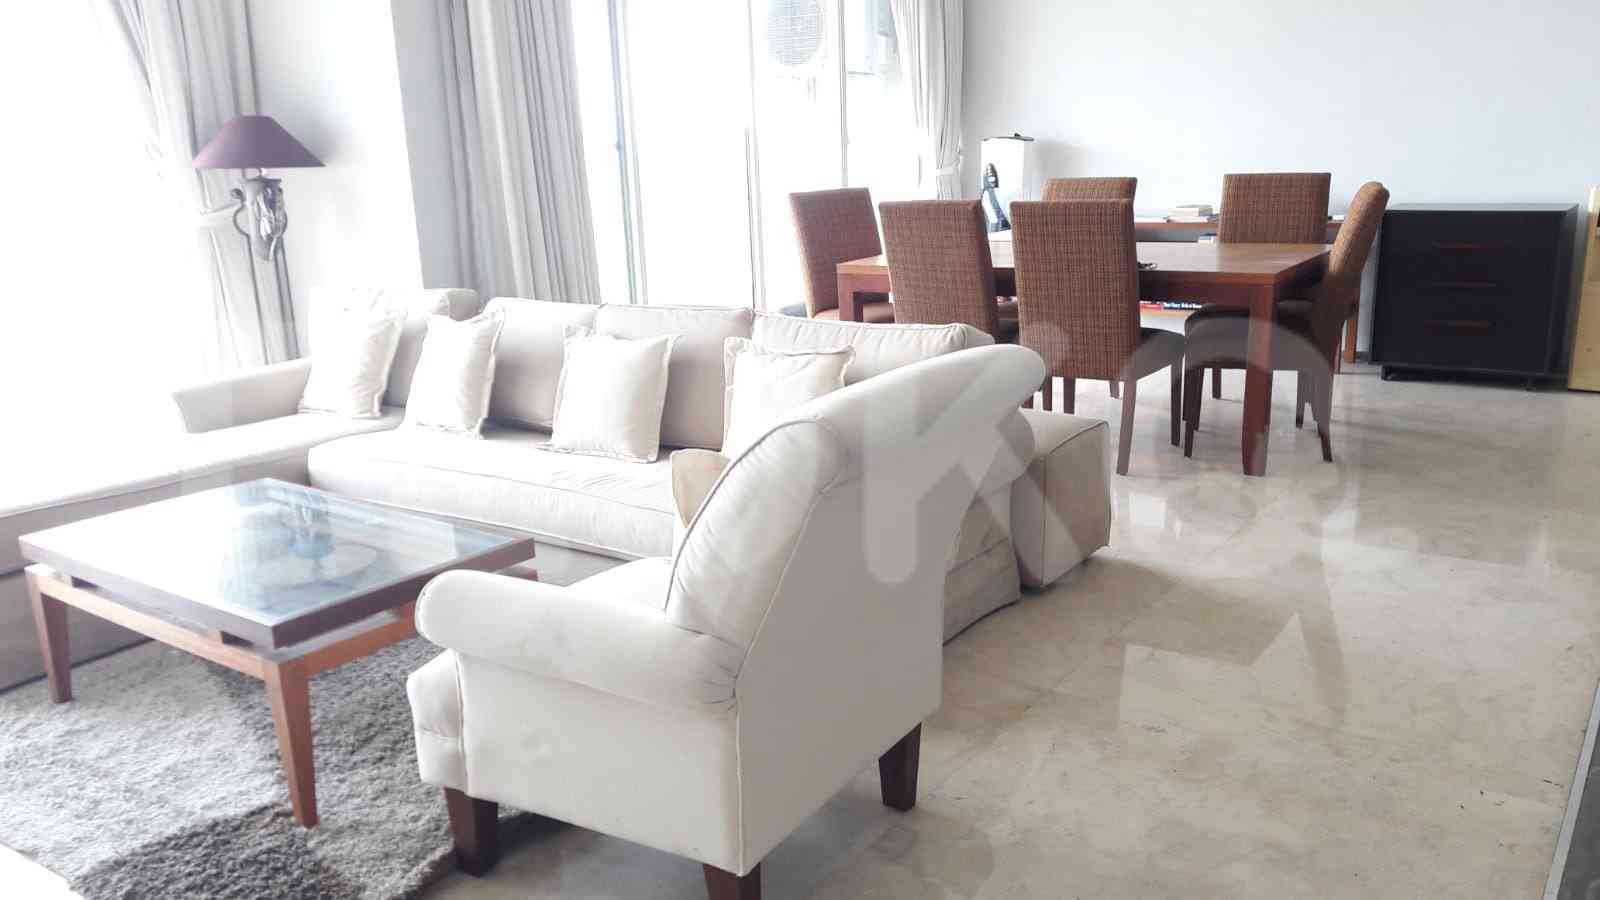 3 Bedroom on 15th Floor for Rent in Nirvana Residence Apartment - fked77 1